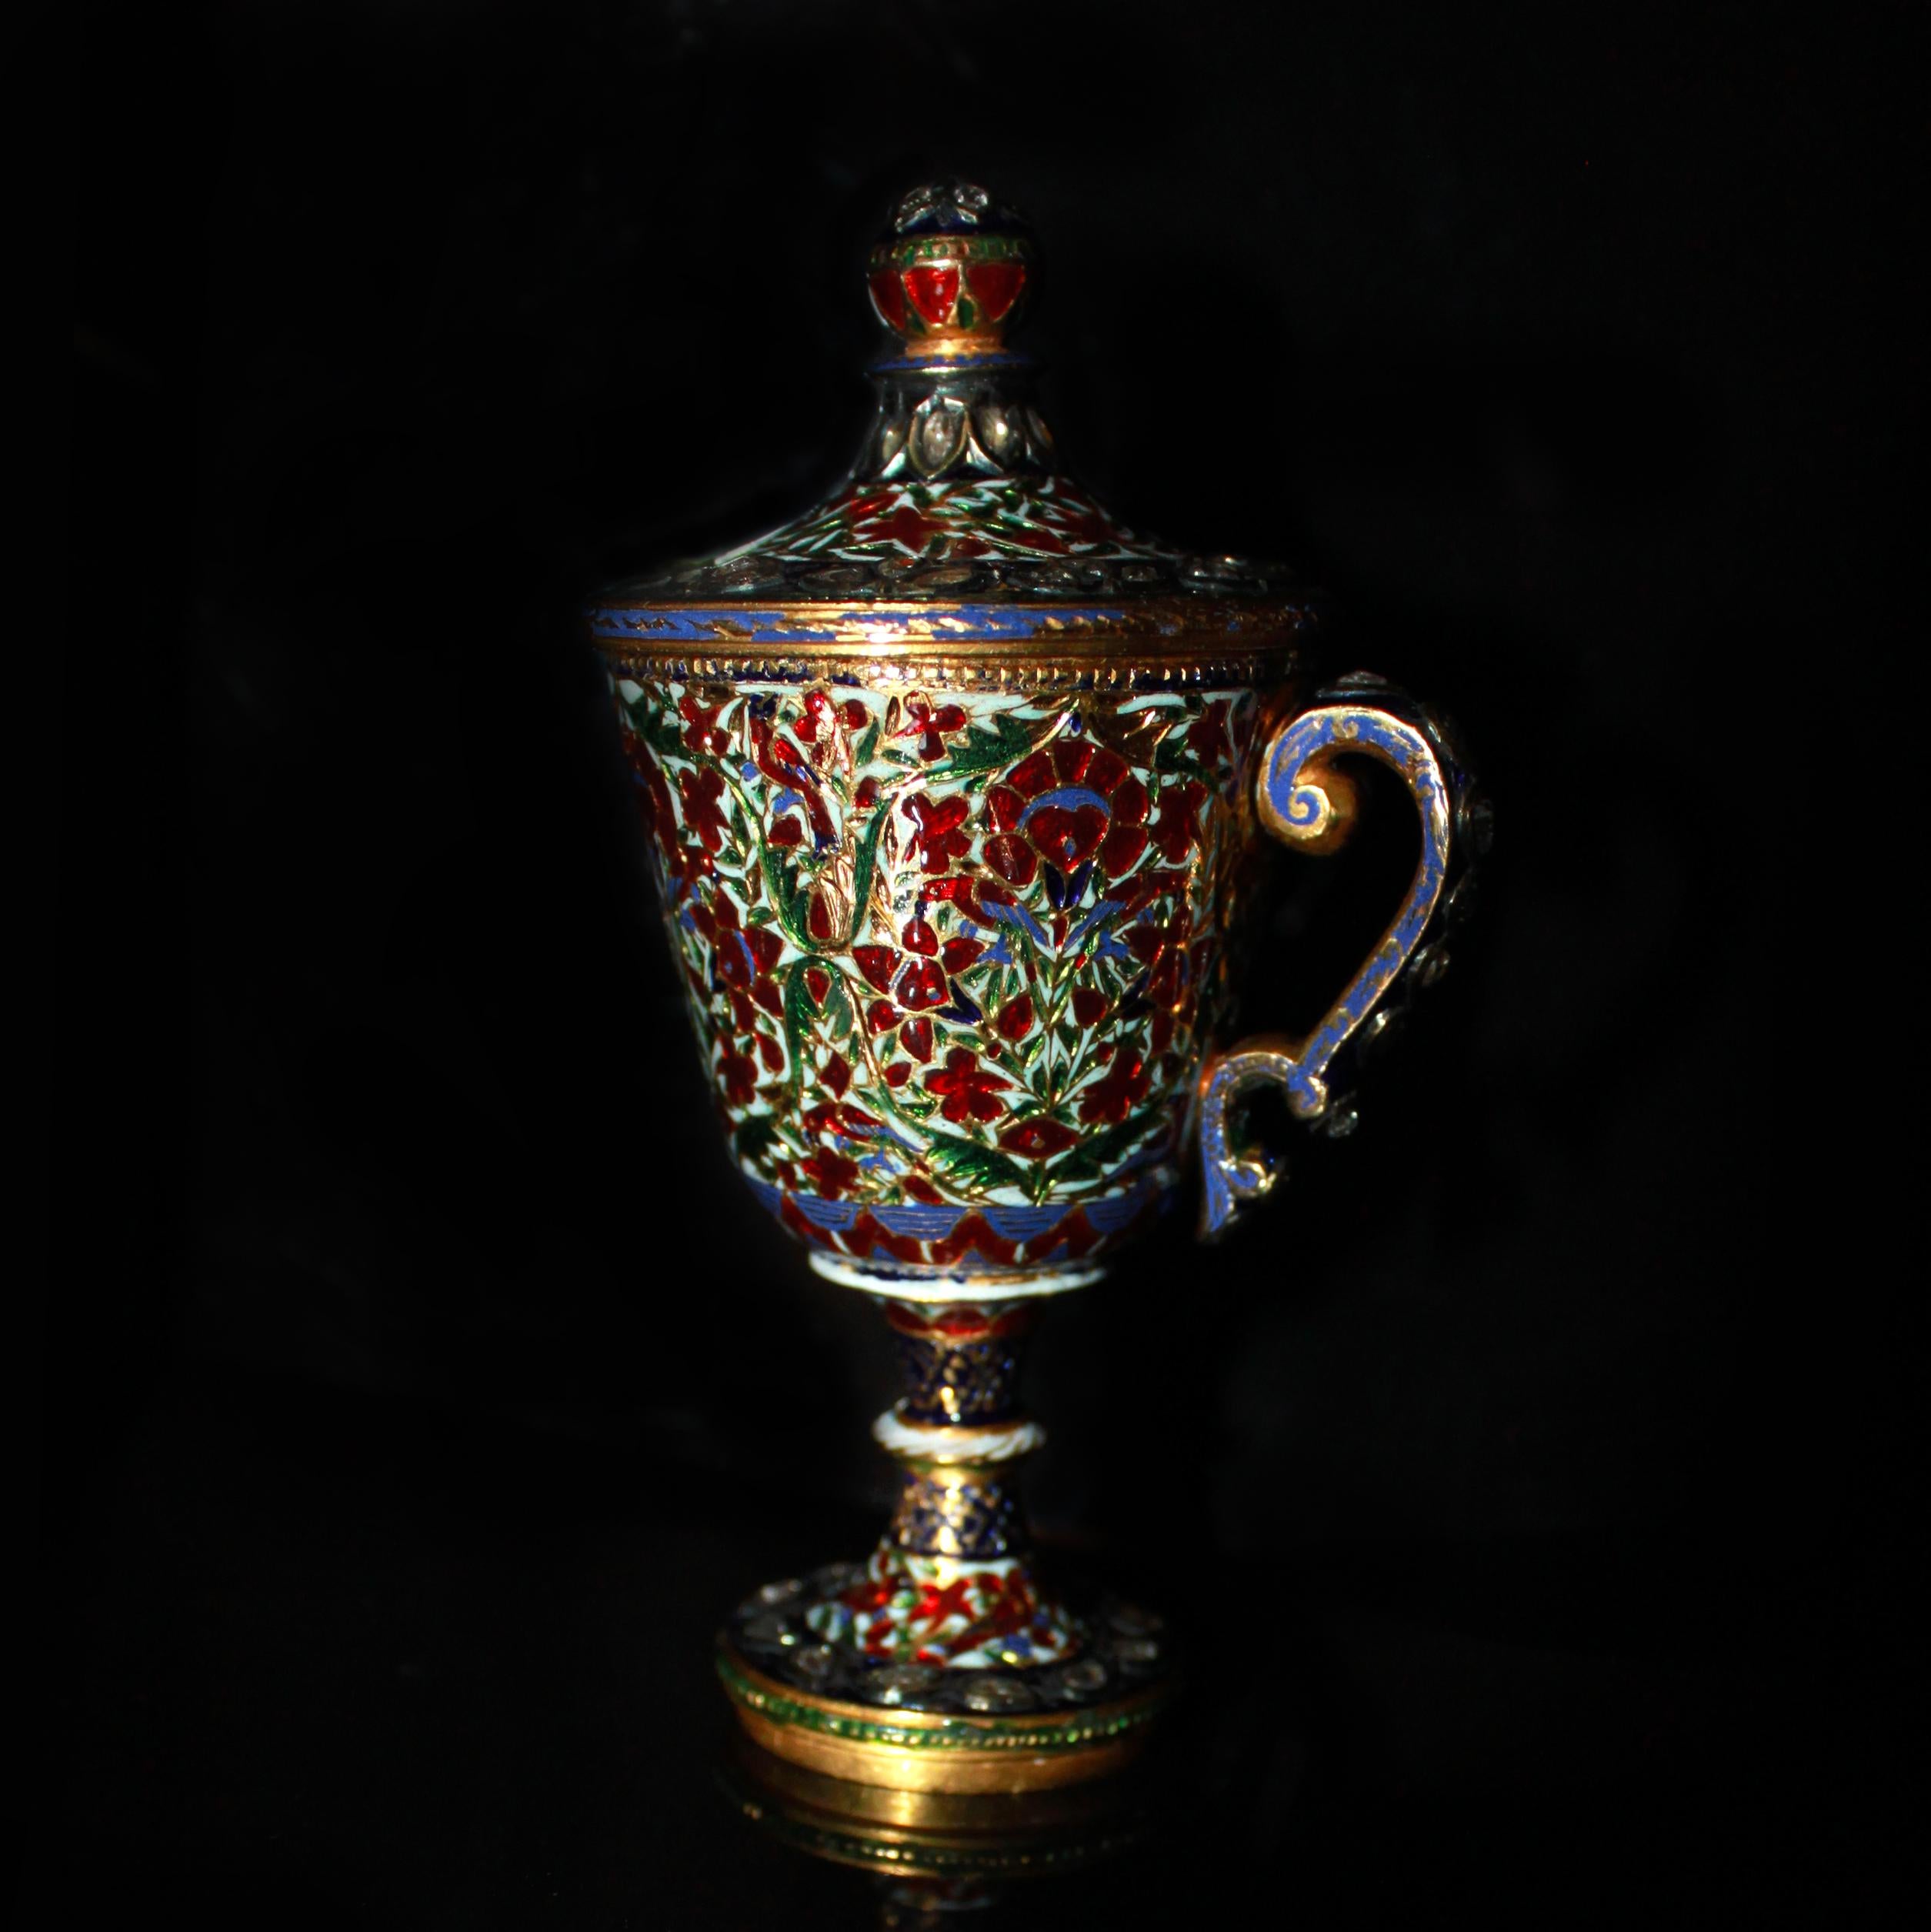 A rare Mughal Enamel and Diamond Cup, early 19th Century

The Mughal cup is finely decorated with a combination of red, white, blue, green 